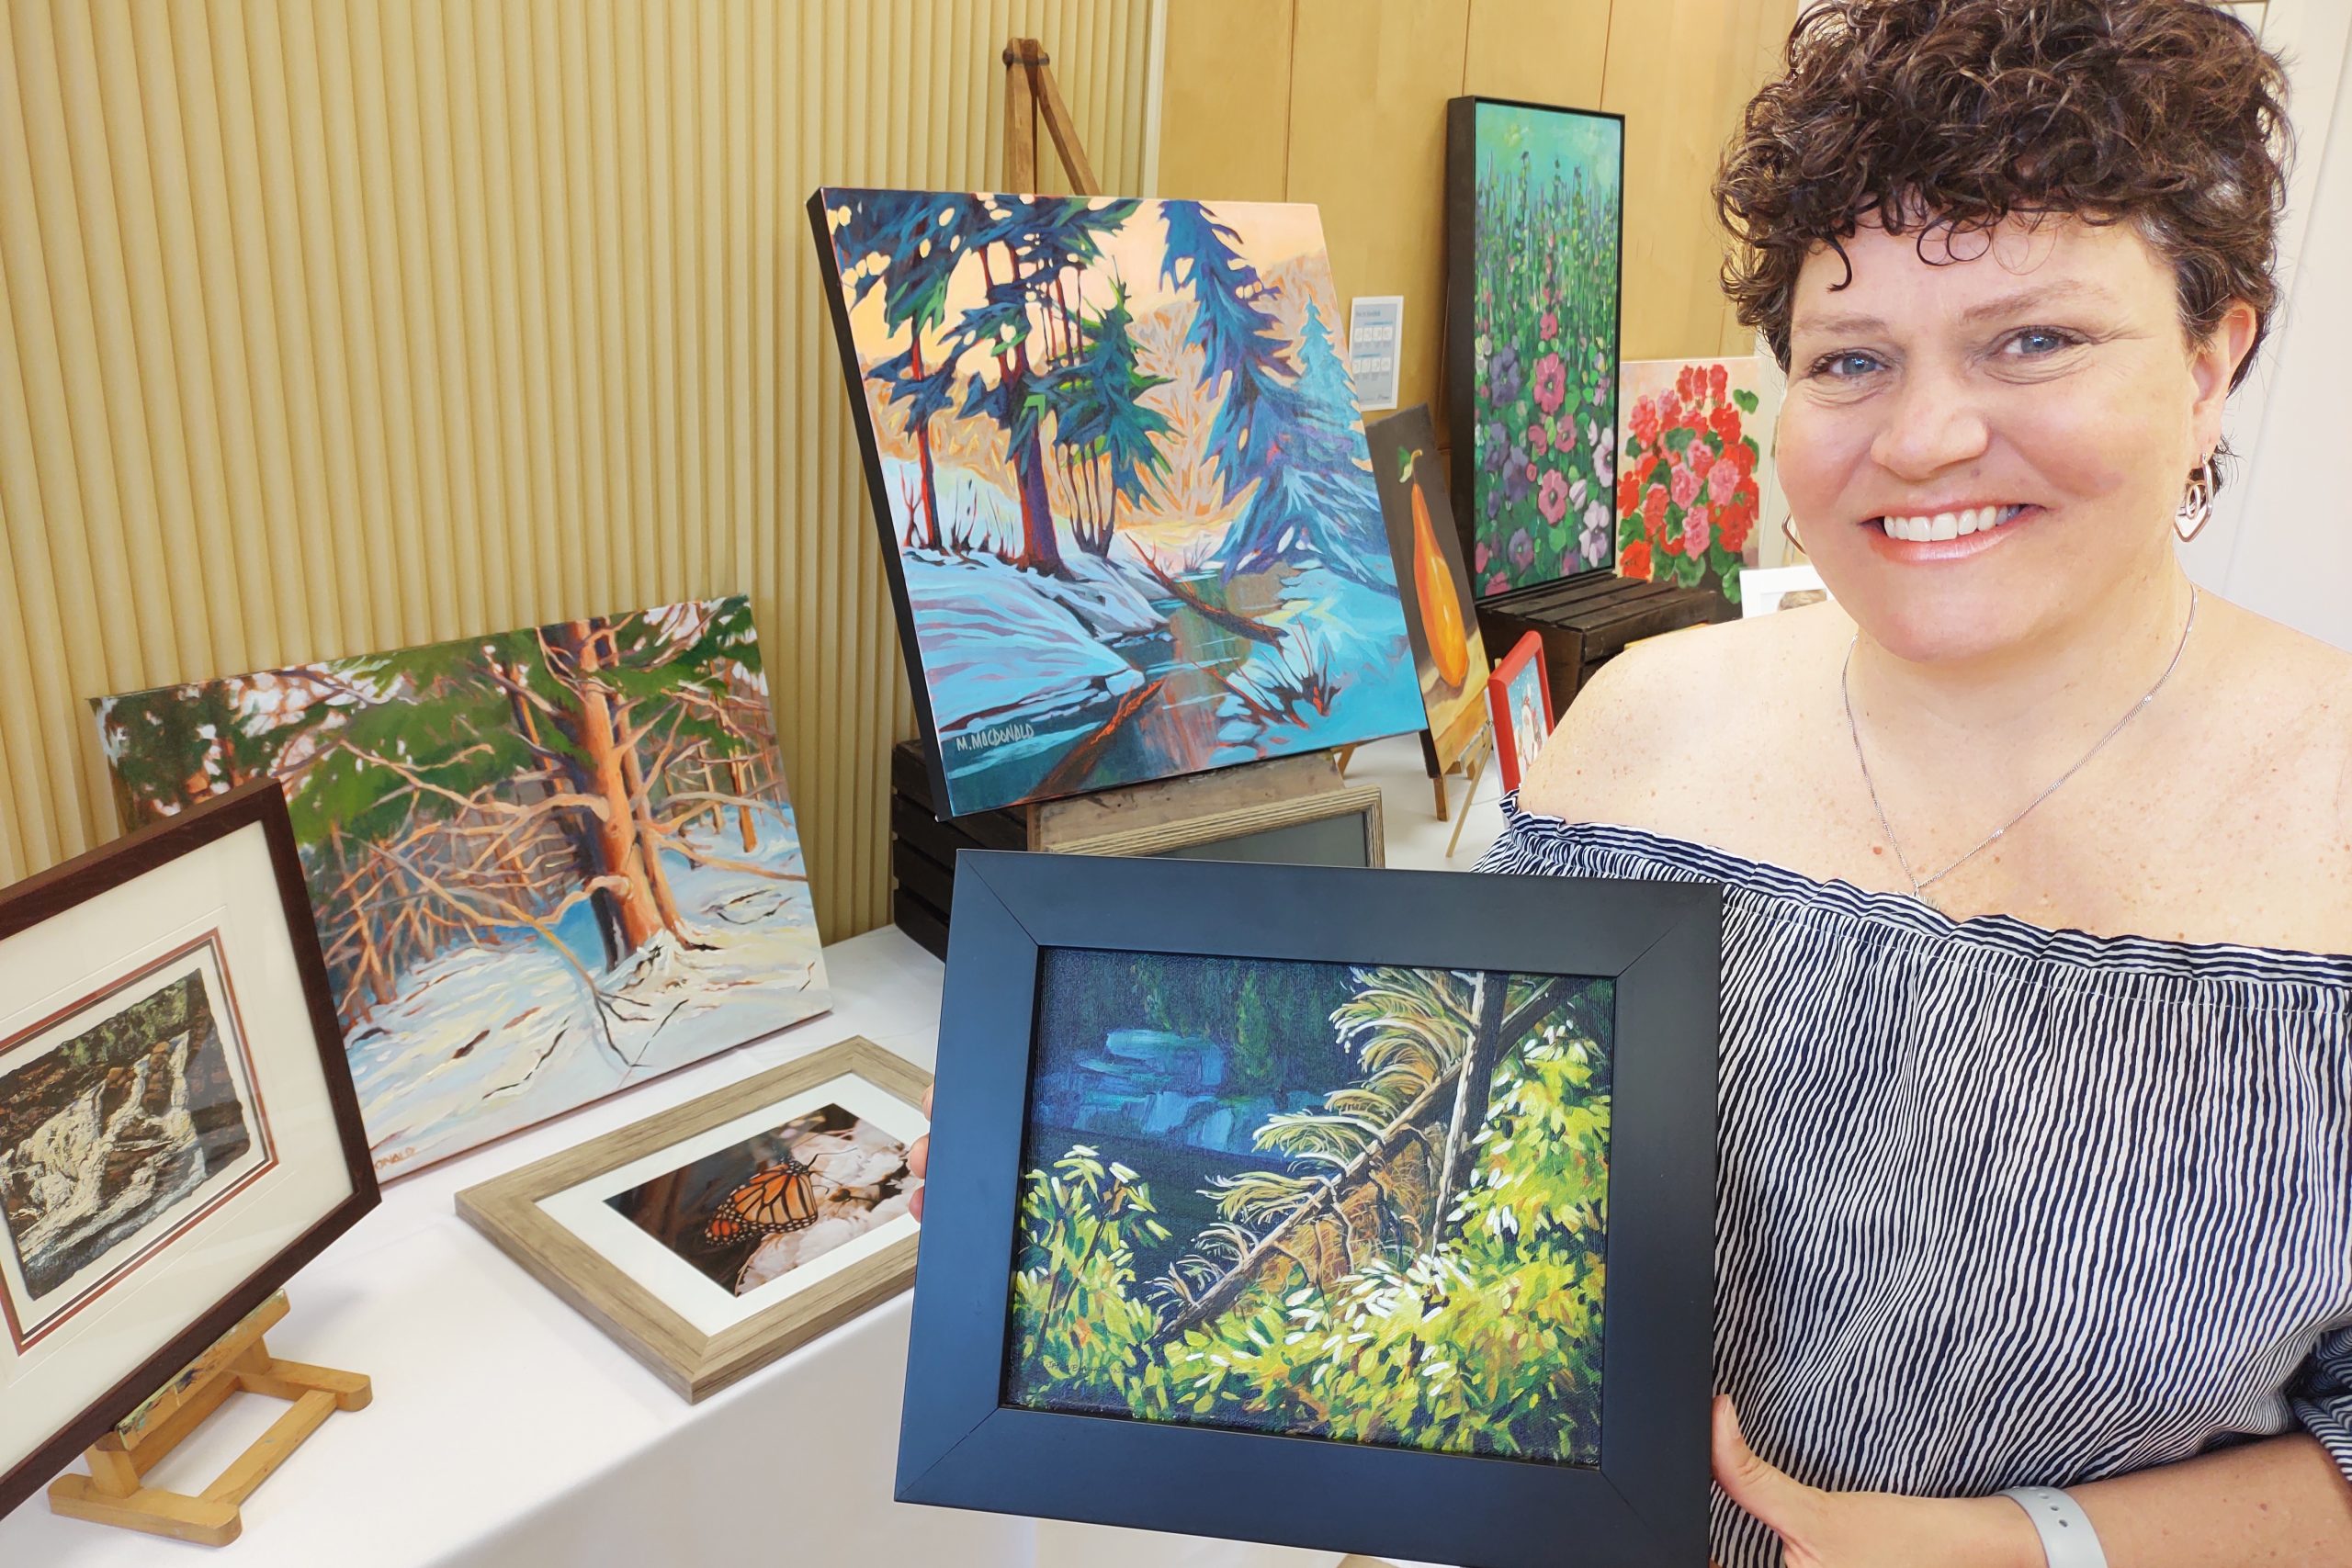 Smiling woman holds a small, framed landscape painting, while standing in front of a table filled with art.